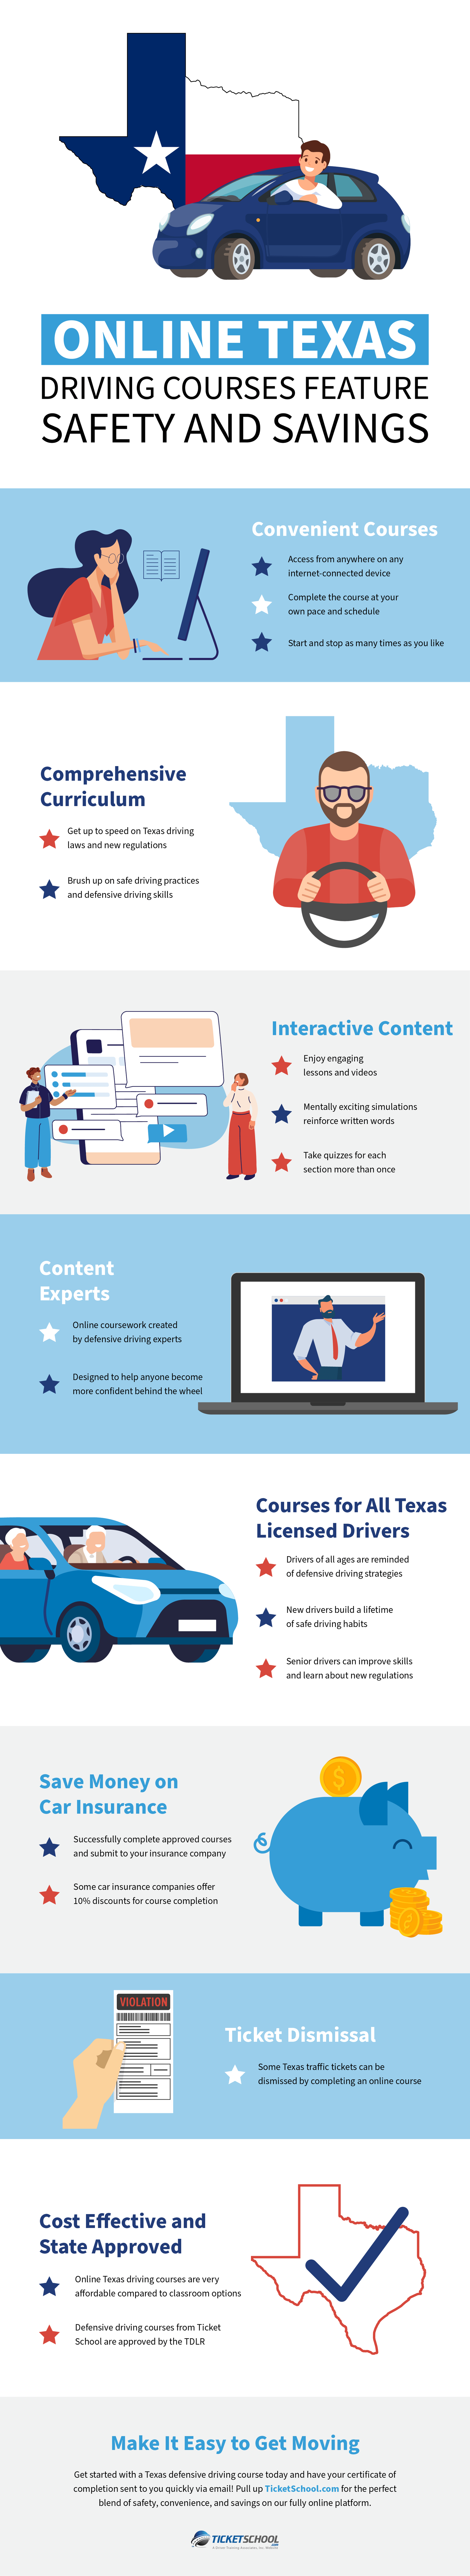 Online Texas Driving Courses Feature Safety and Savings Infographic